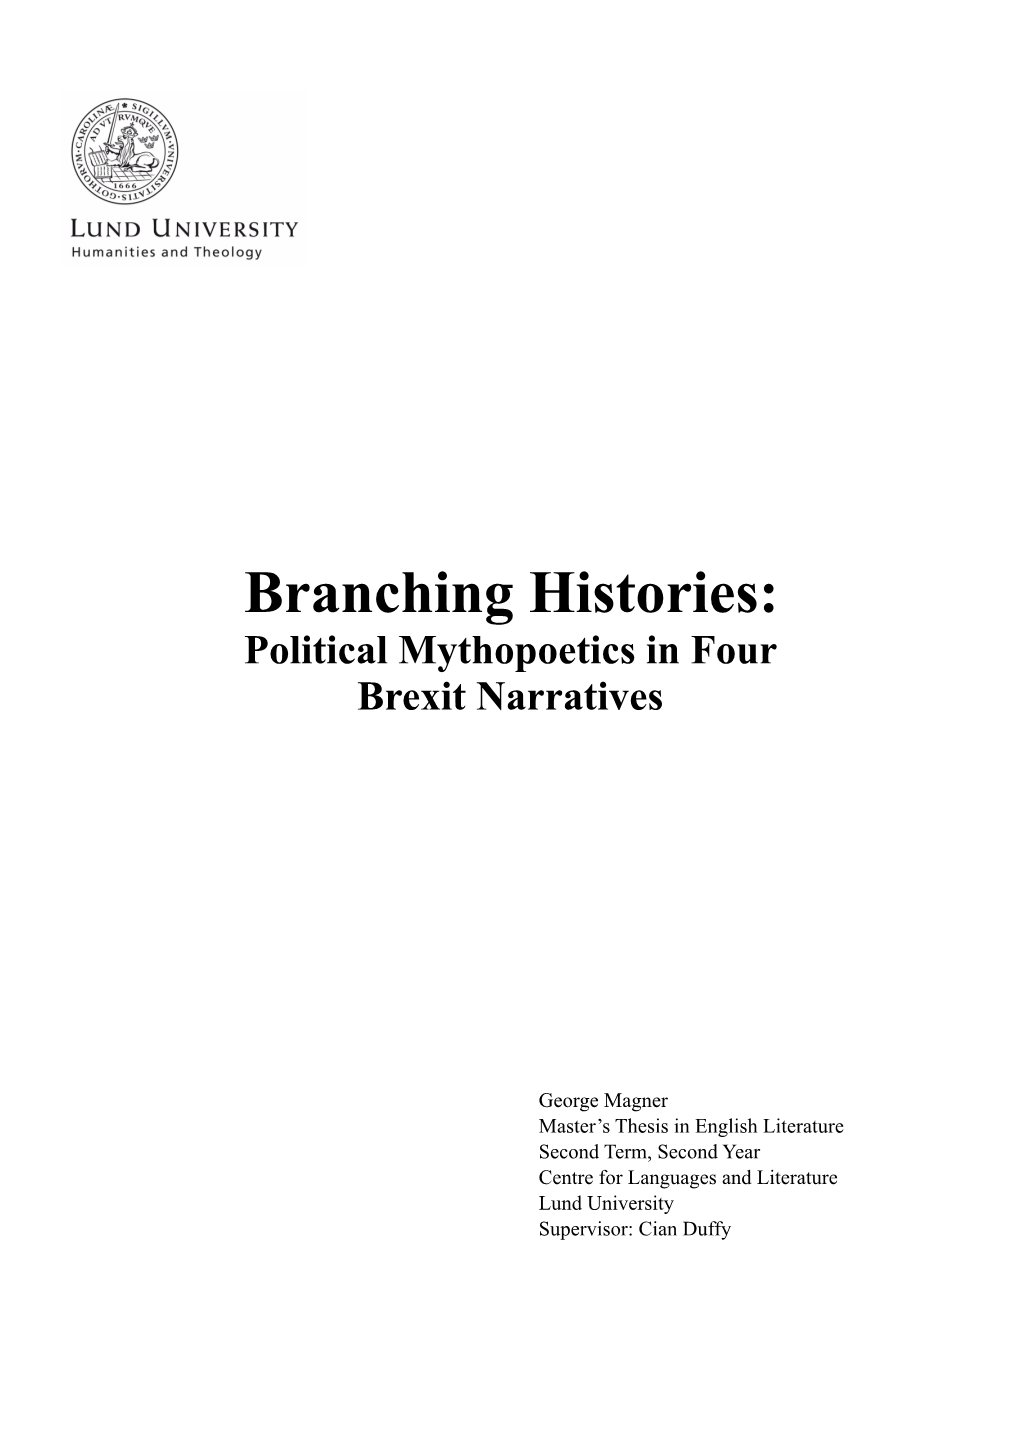 Branching Histories: Political Mythopoetics in Four Brexit Narratives